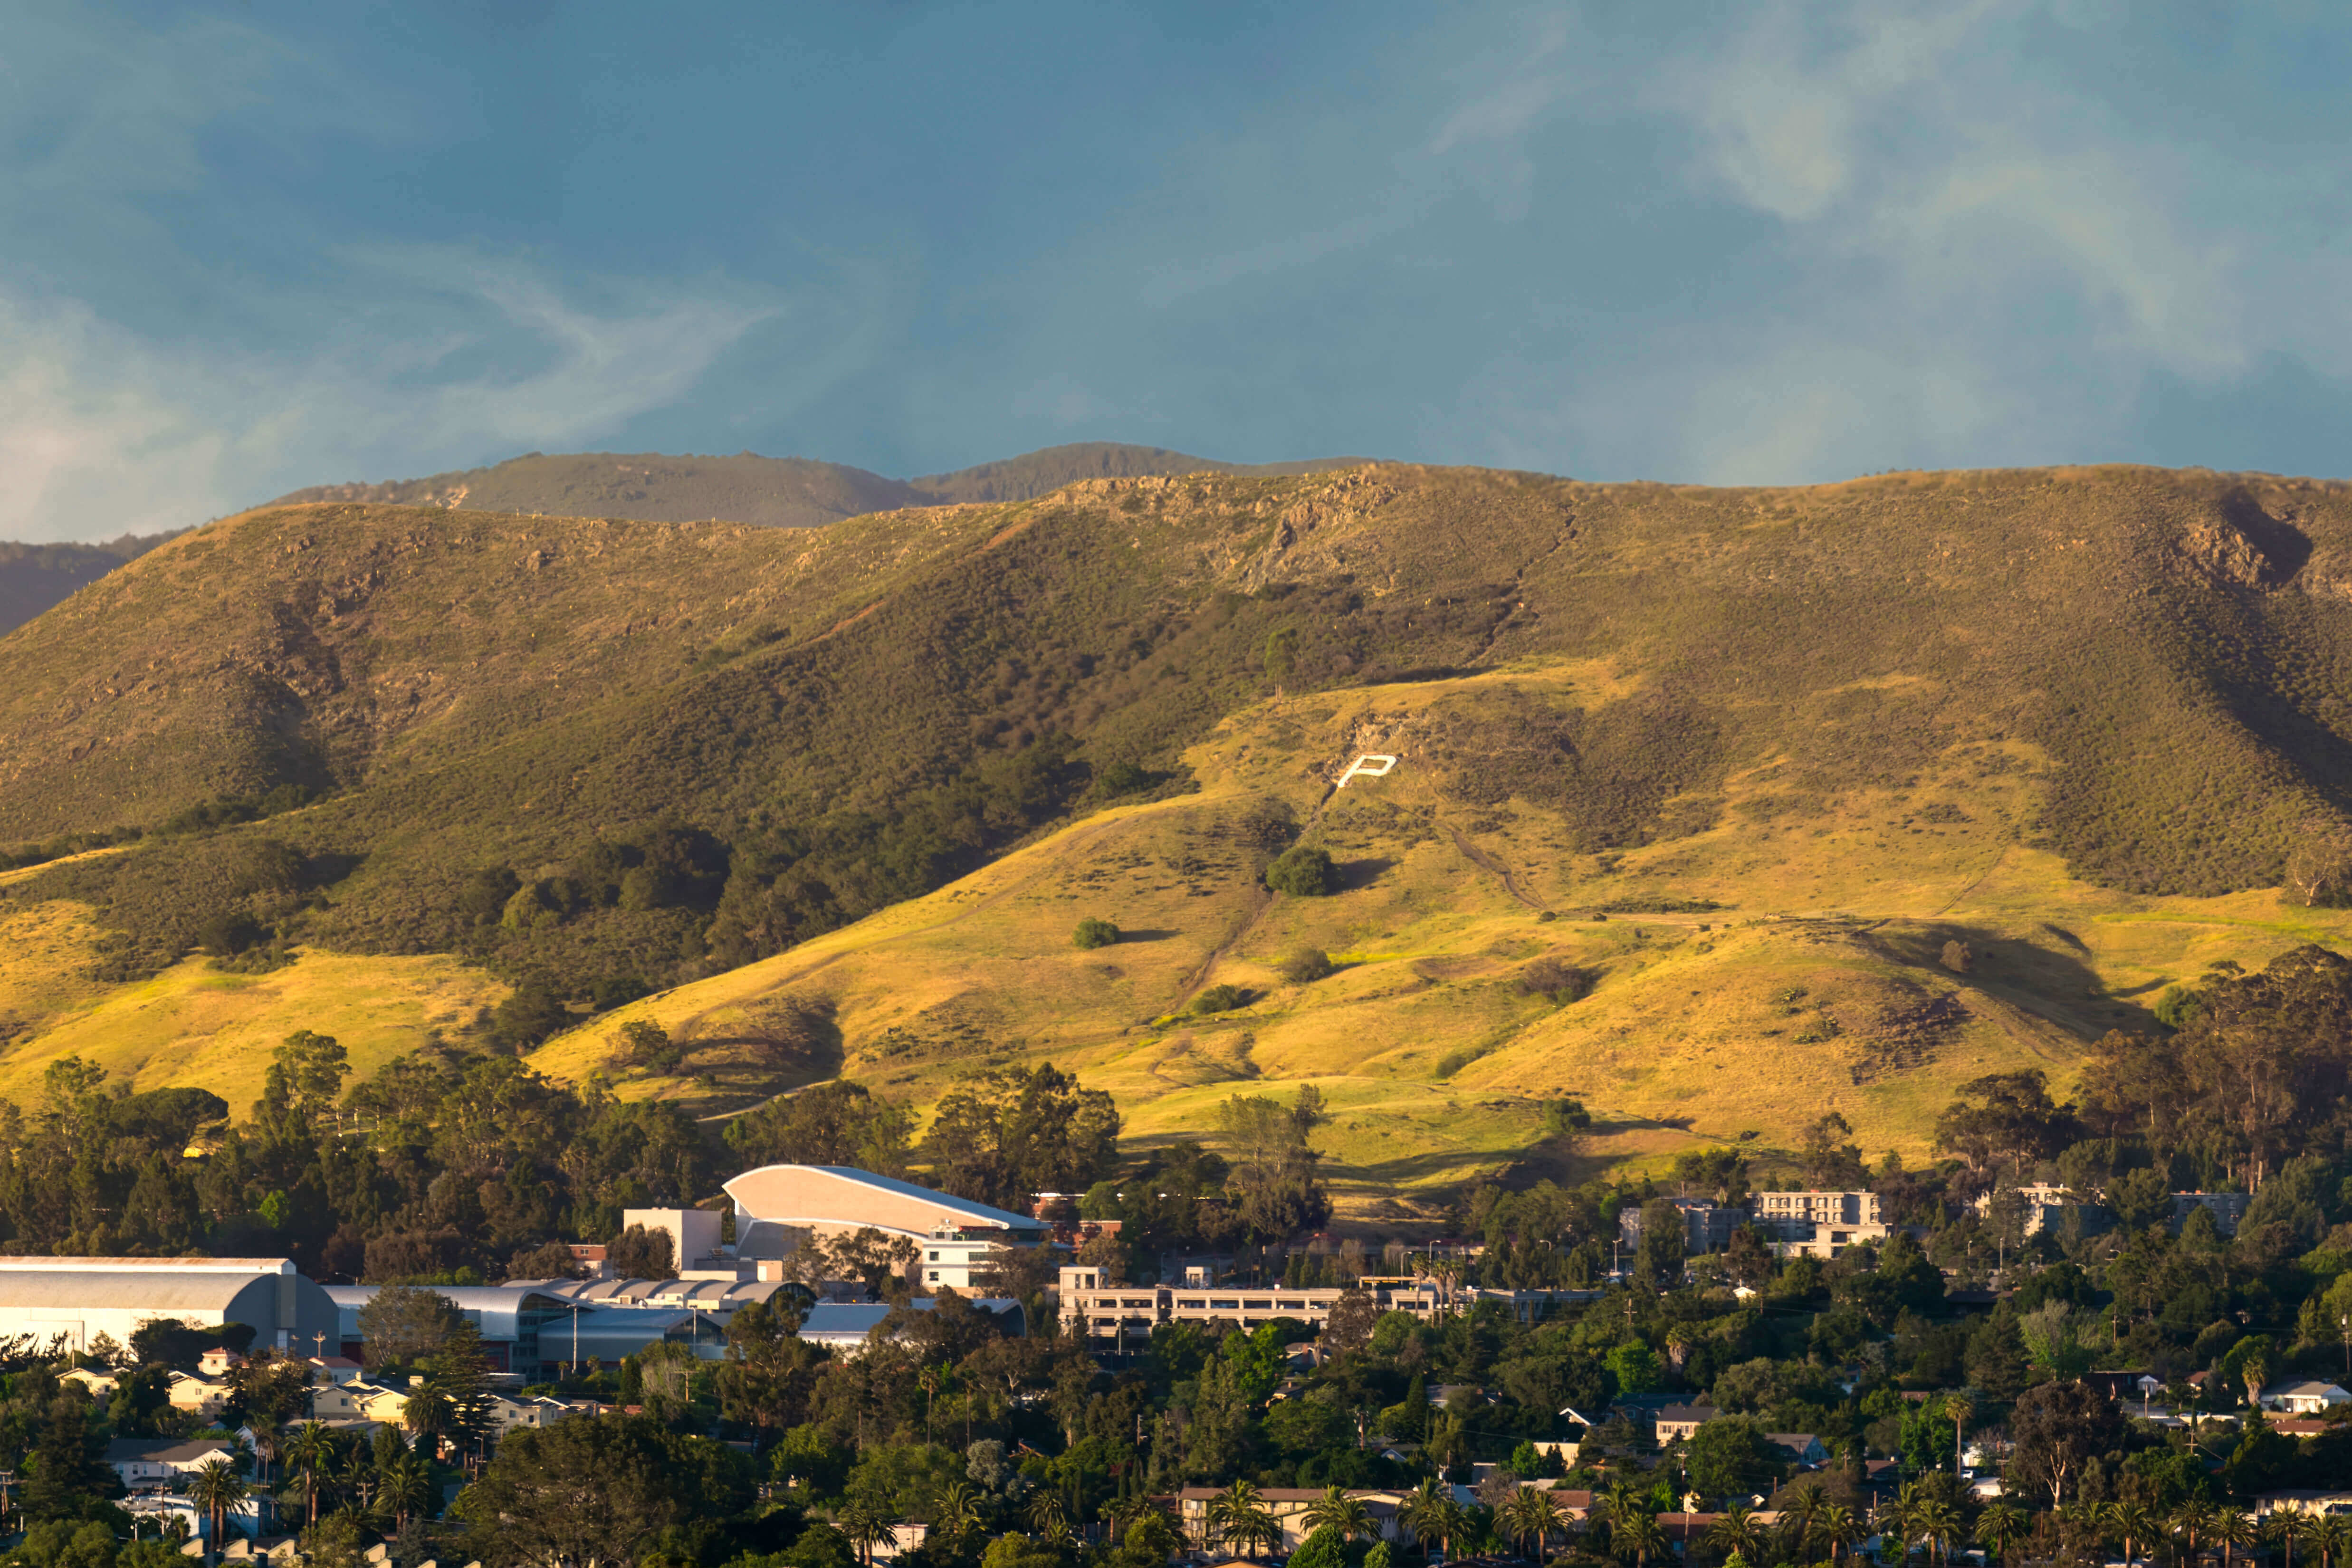 Access to the Cal Poly “P” has been restricted due to safety concerns.